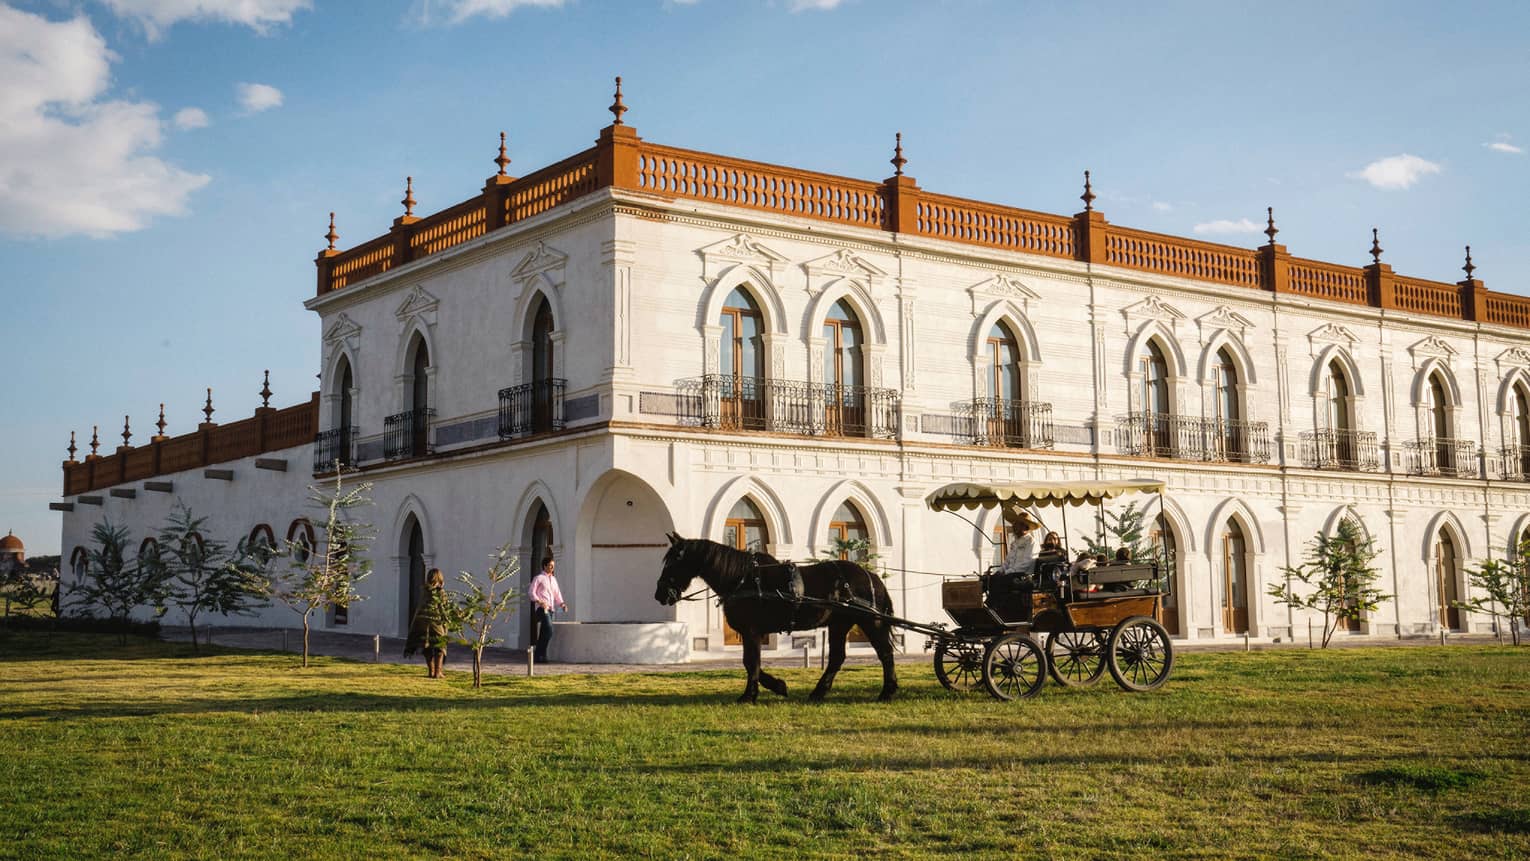 A horse pulling a carriages over grass outside of a large building.